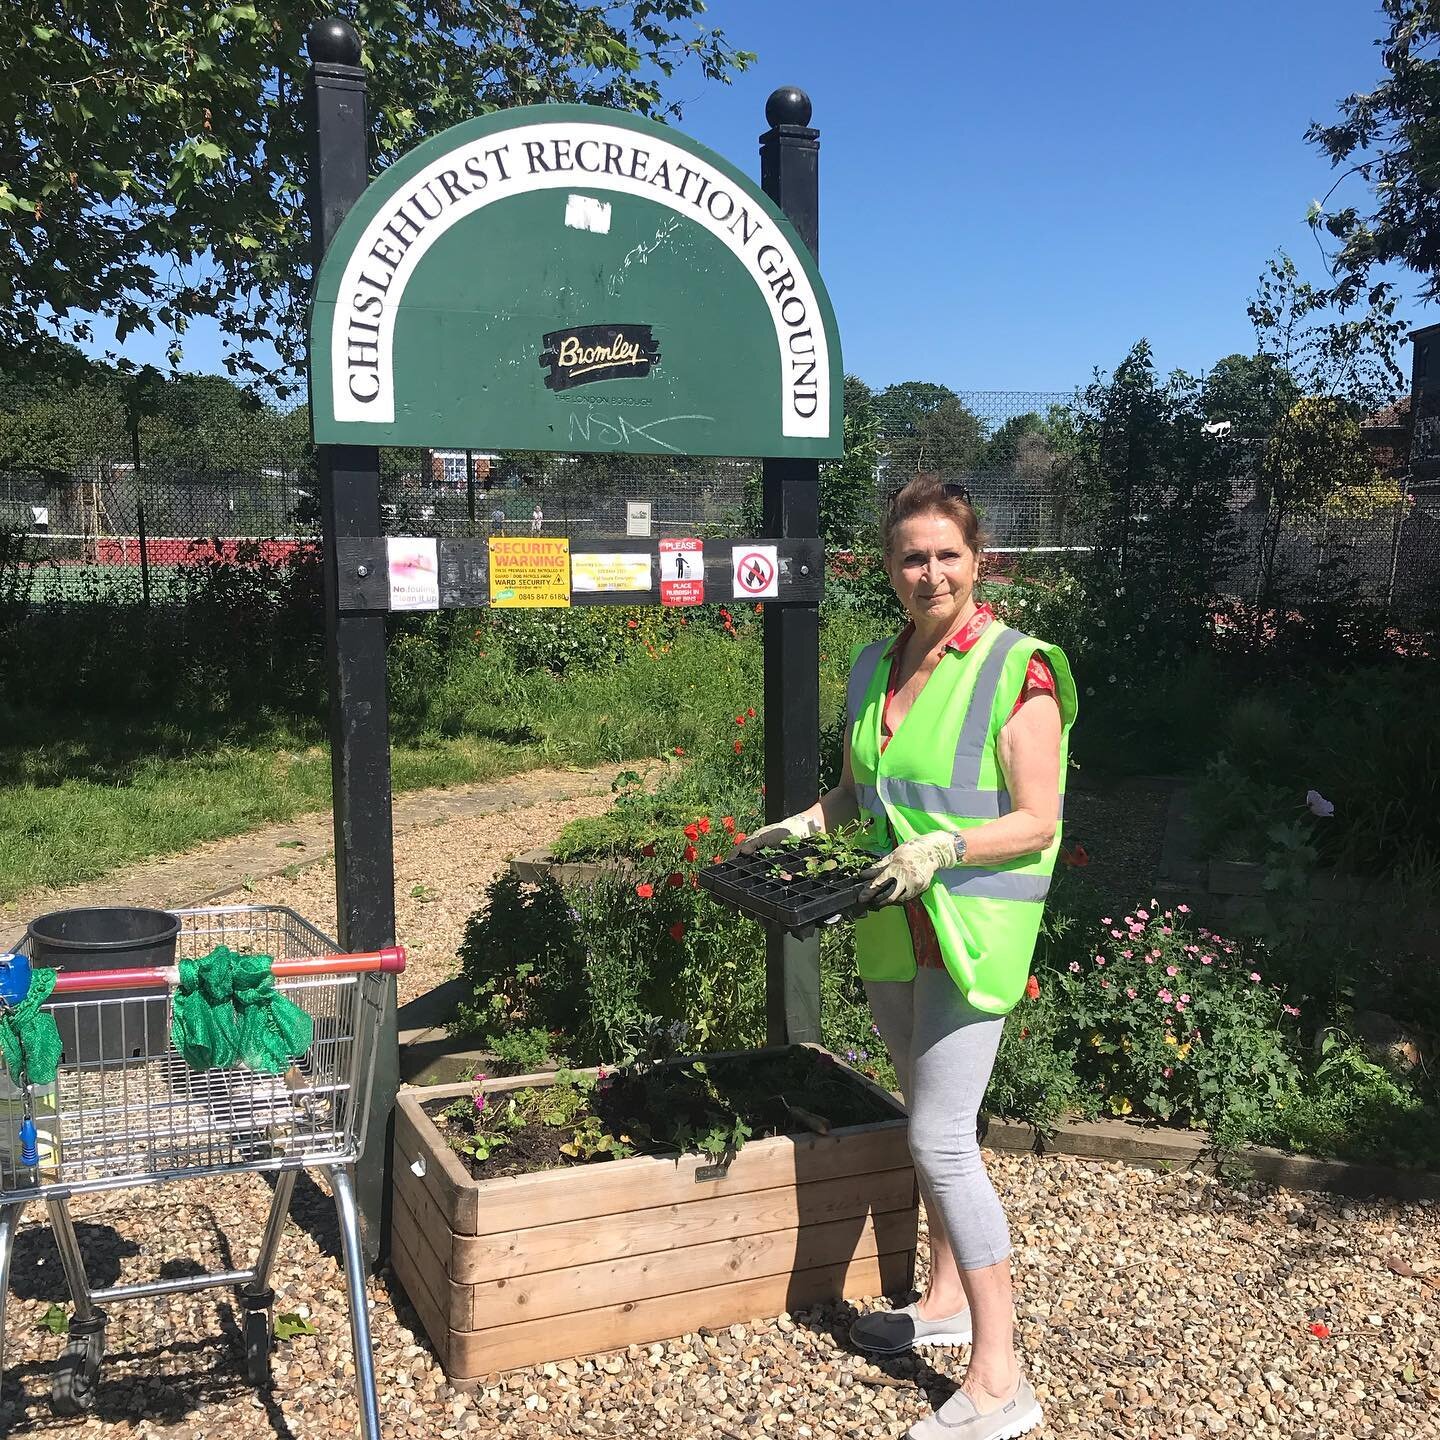 Meet Angela, one of our amazing Gardening Club volunteers. Today Angela planted Pansies in our tubs which hopefully will do nicely after the rain tomorrow 🌸 

If you want to become a Gardening Club volunteer just turn up by the Empress Drive entranc